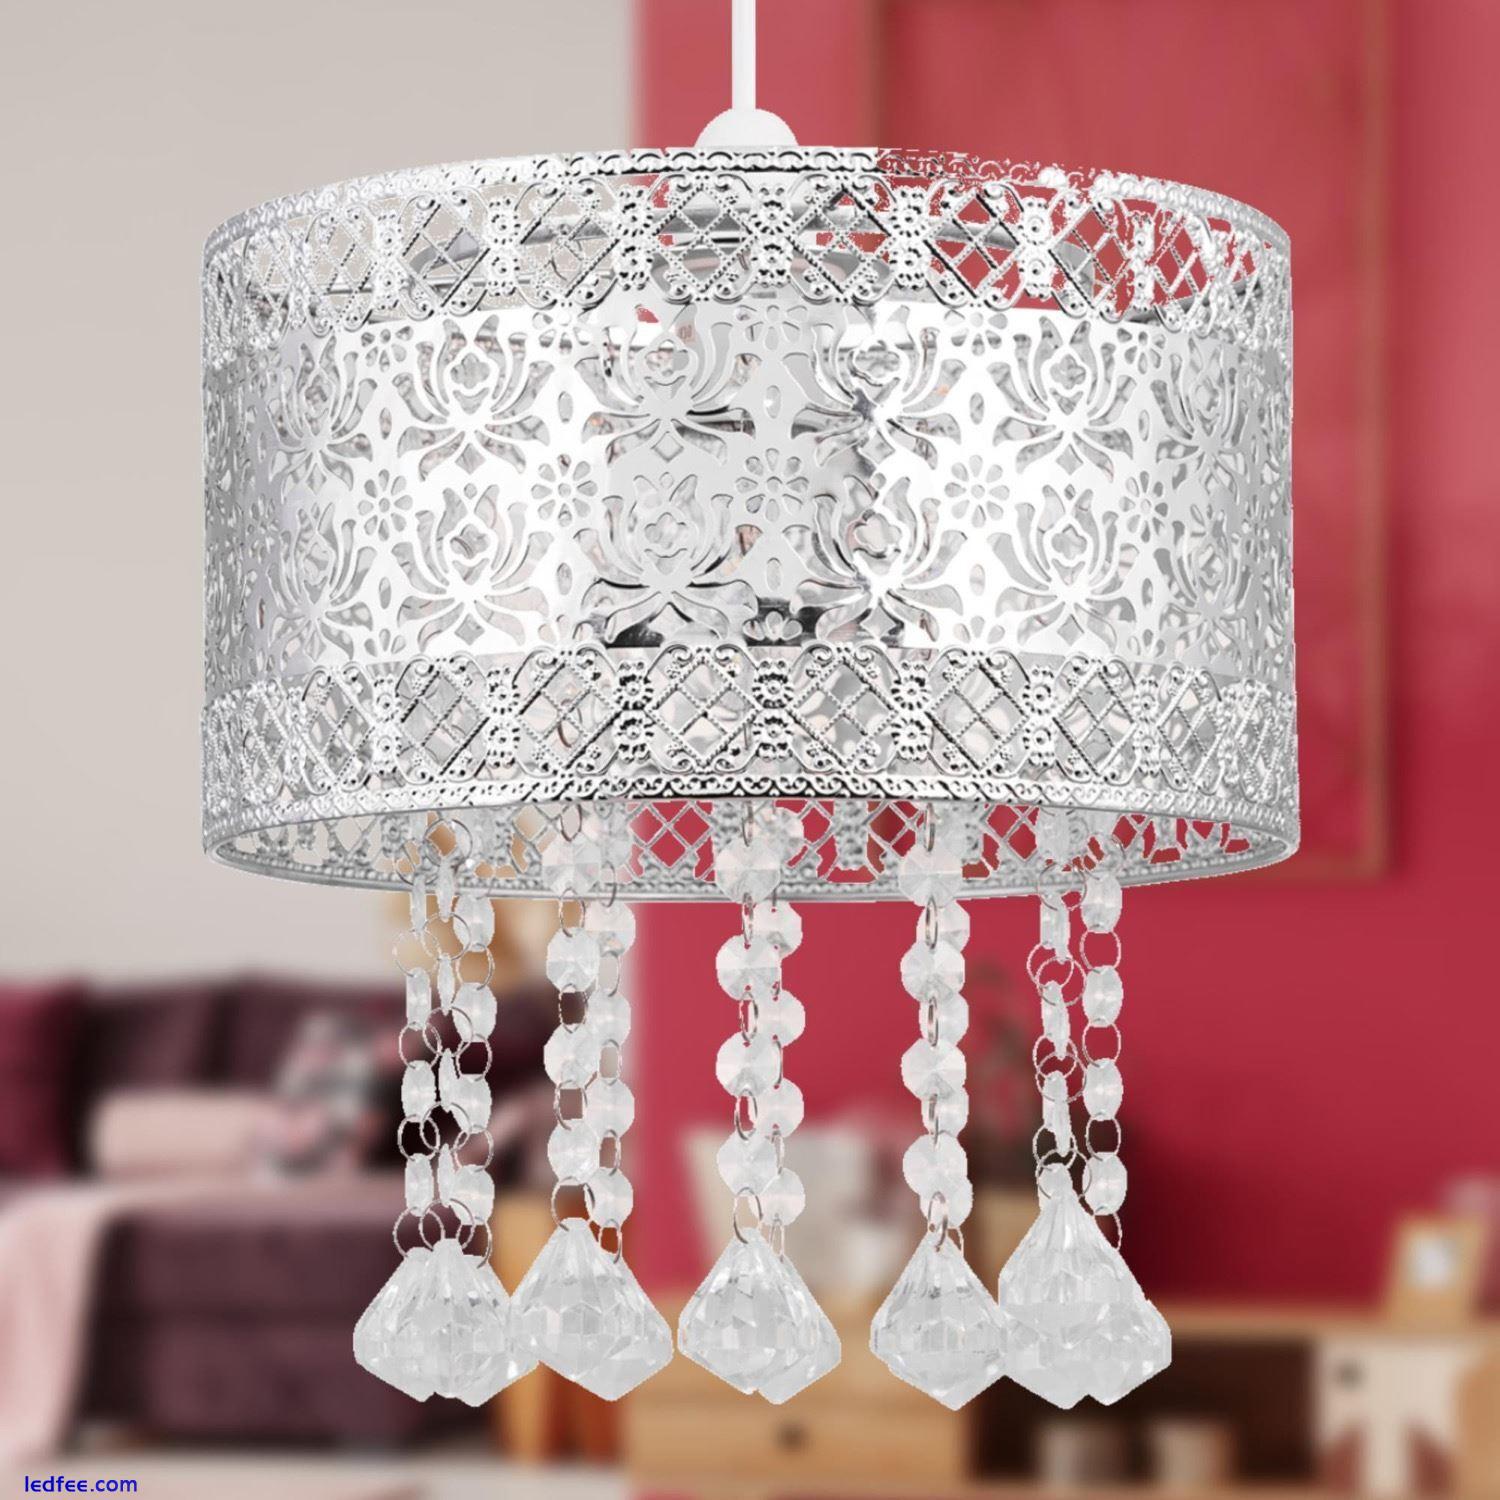 Modern Pair of Chrome Metal Jewelled Easy Fit Ceiling Light Shade Chandeliers 2 